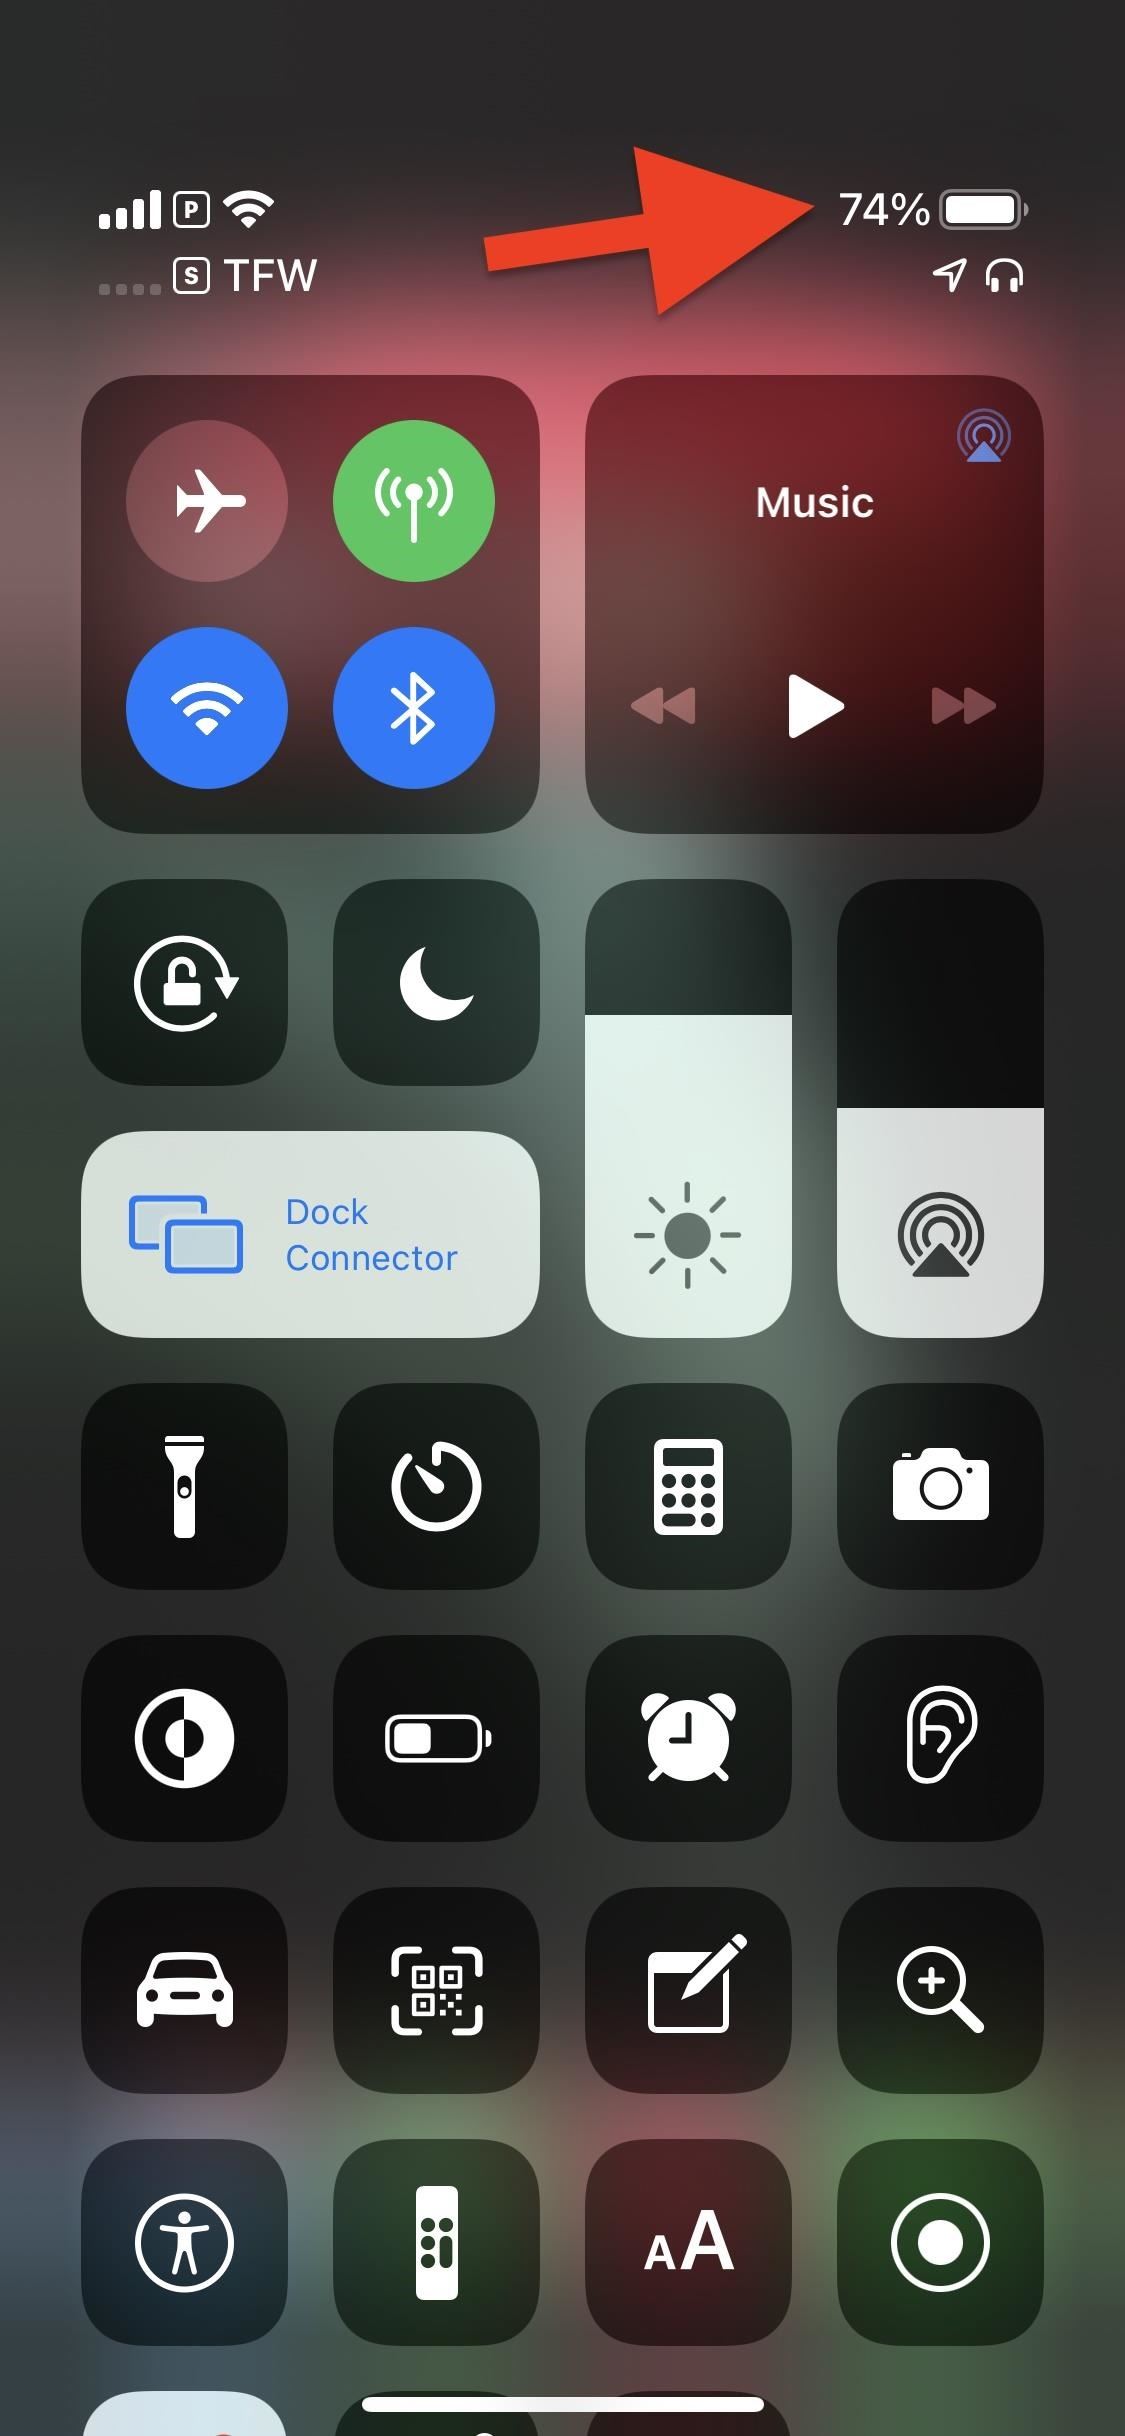 How to View the Exact Battery Percentage on Your iPhone 12, 12 Mini, 12 Pro, or 12 Pro Max